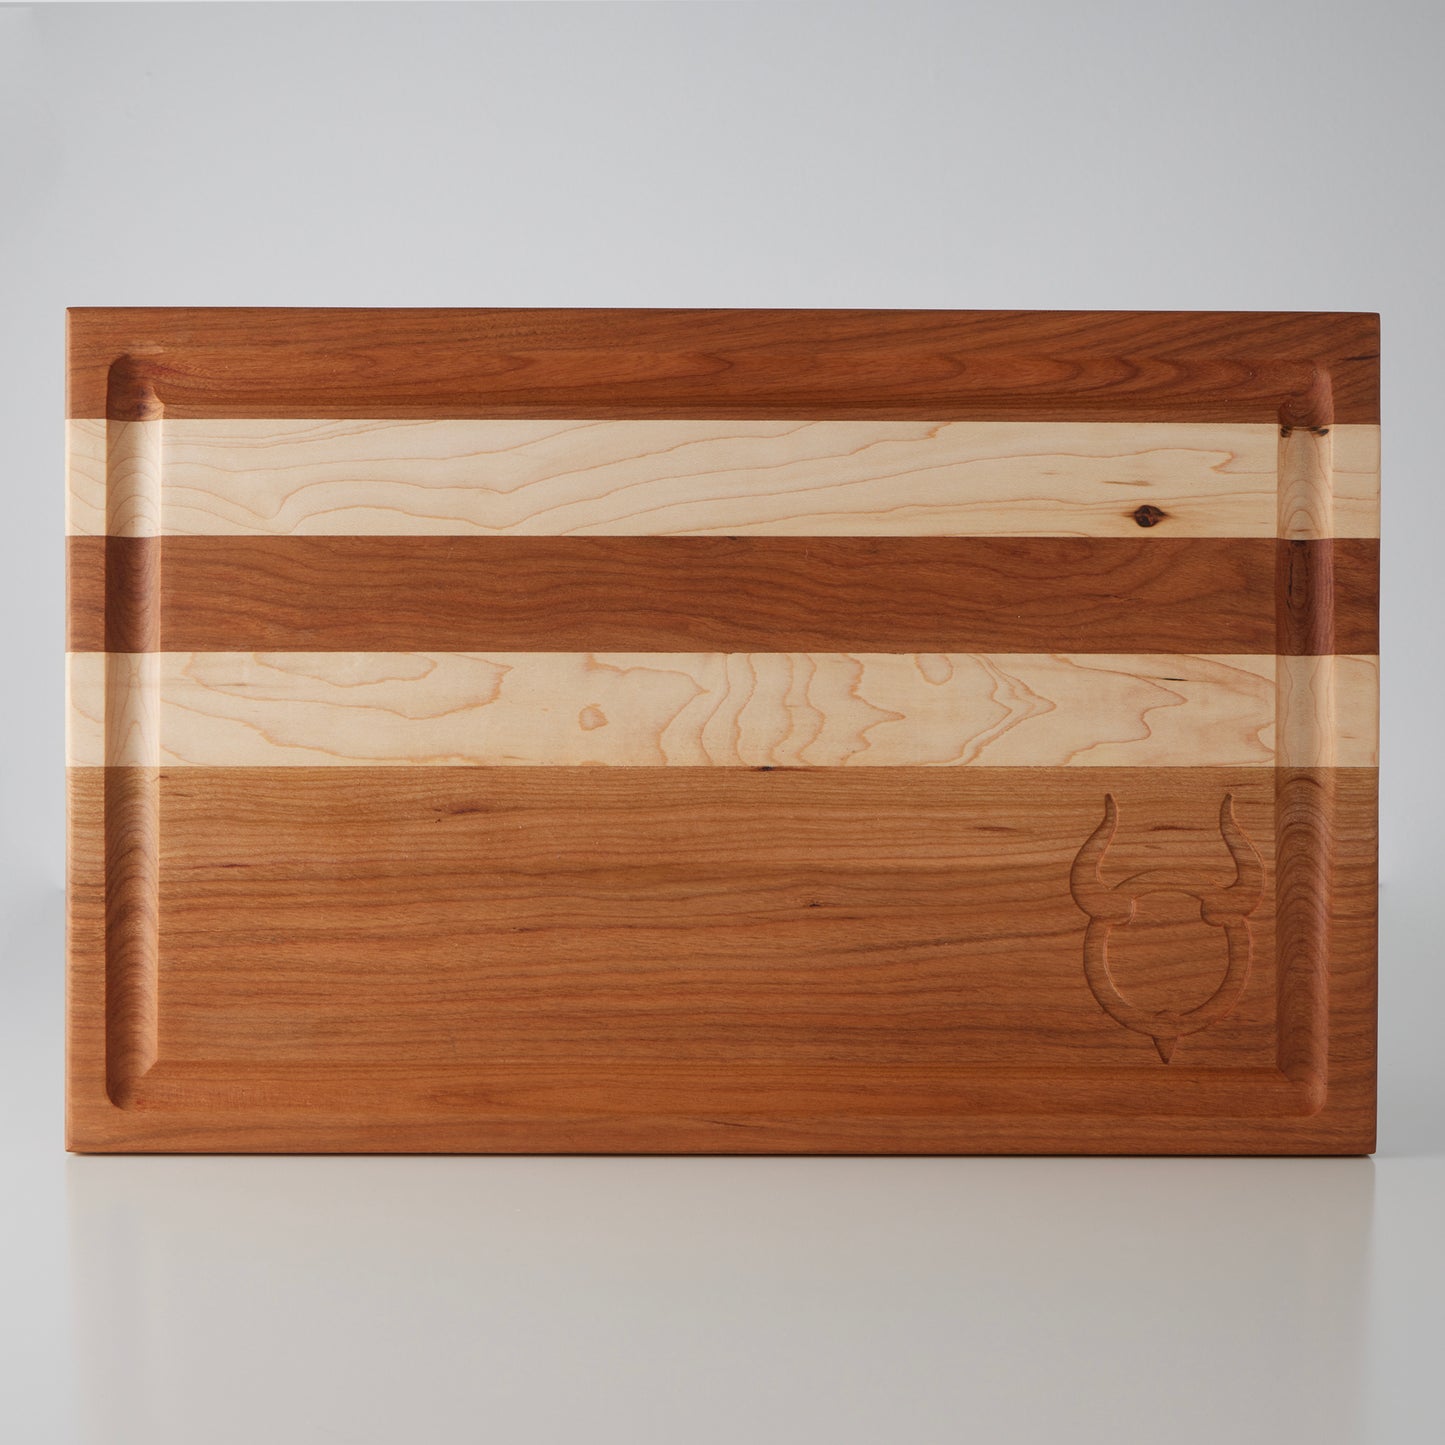 Cherry and Maple Cutting Board 11" x 17" x 7/8"